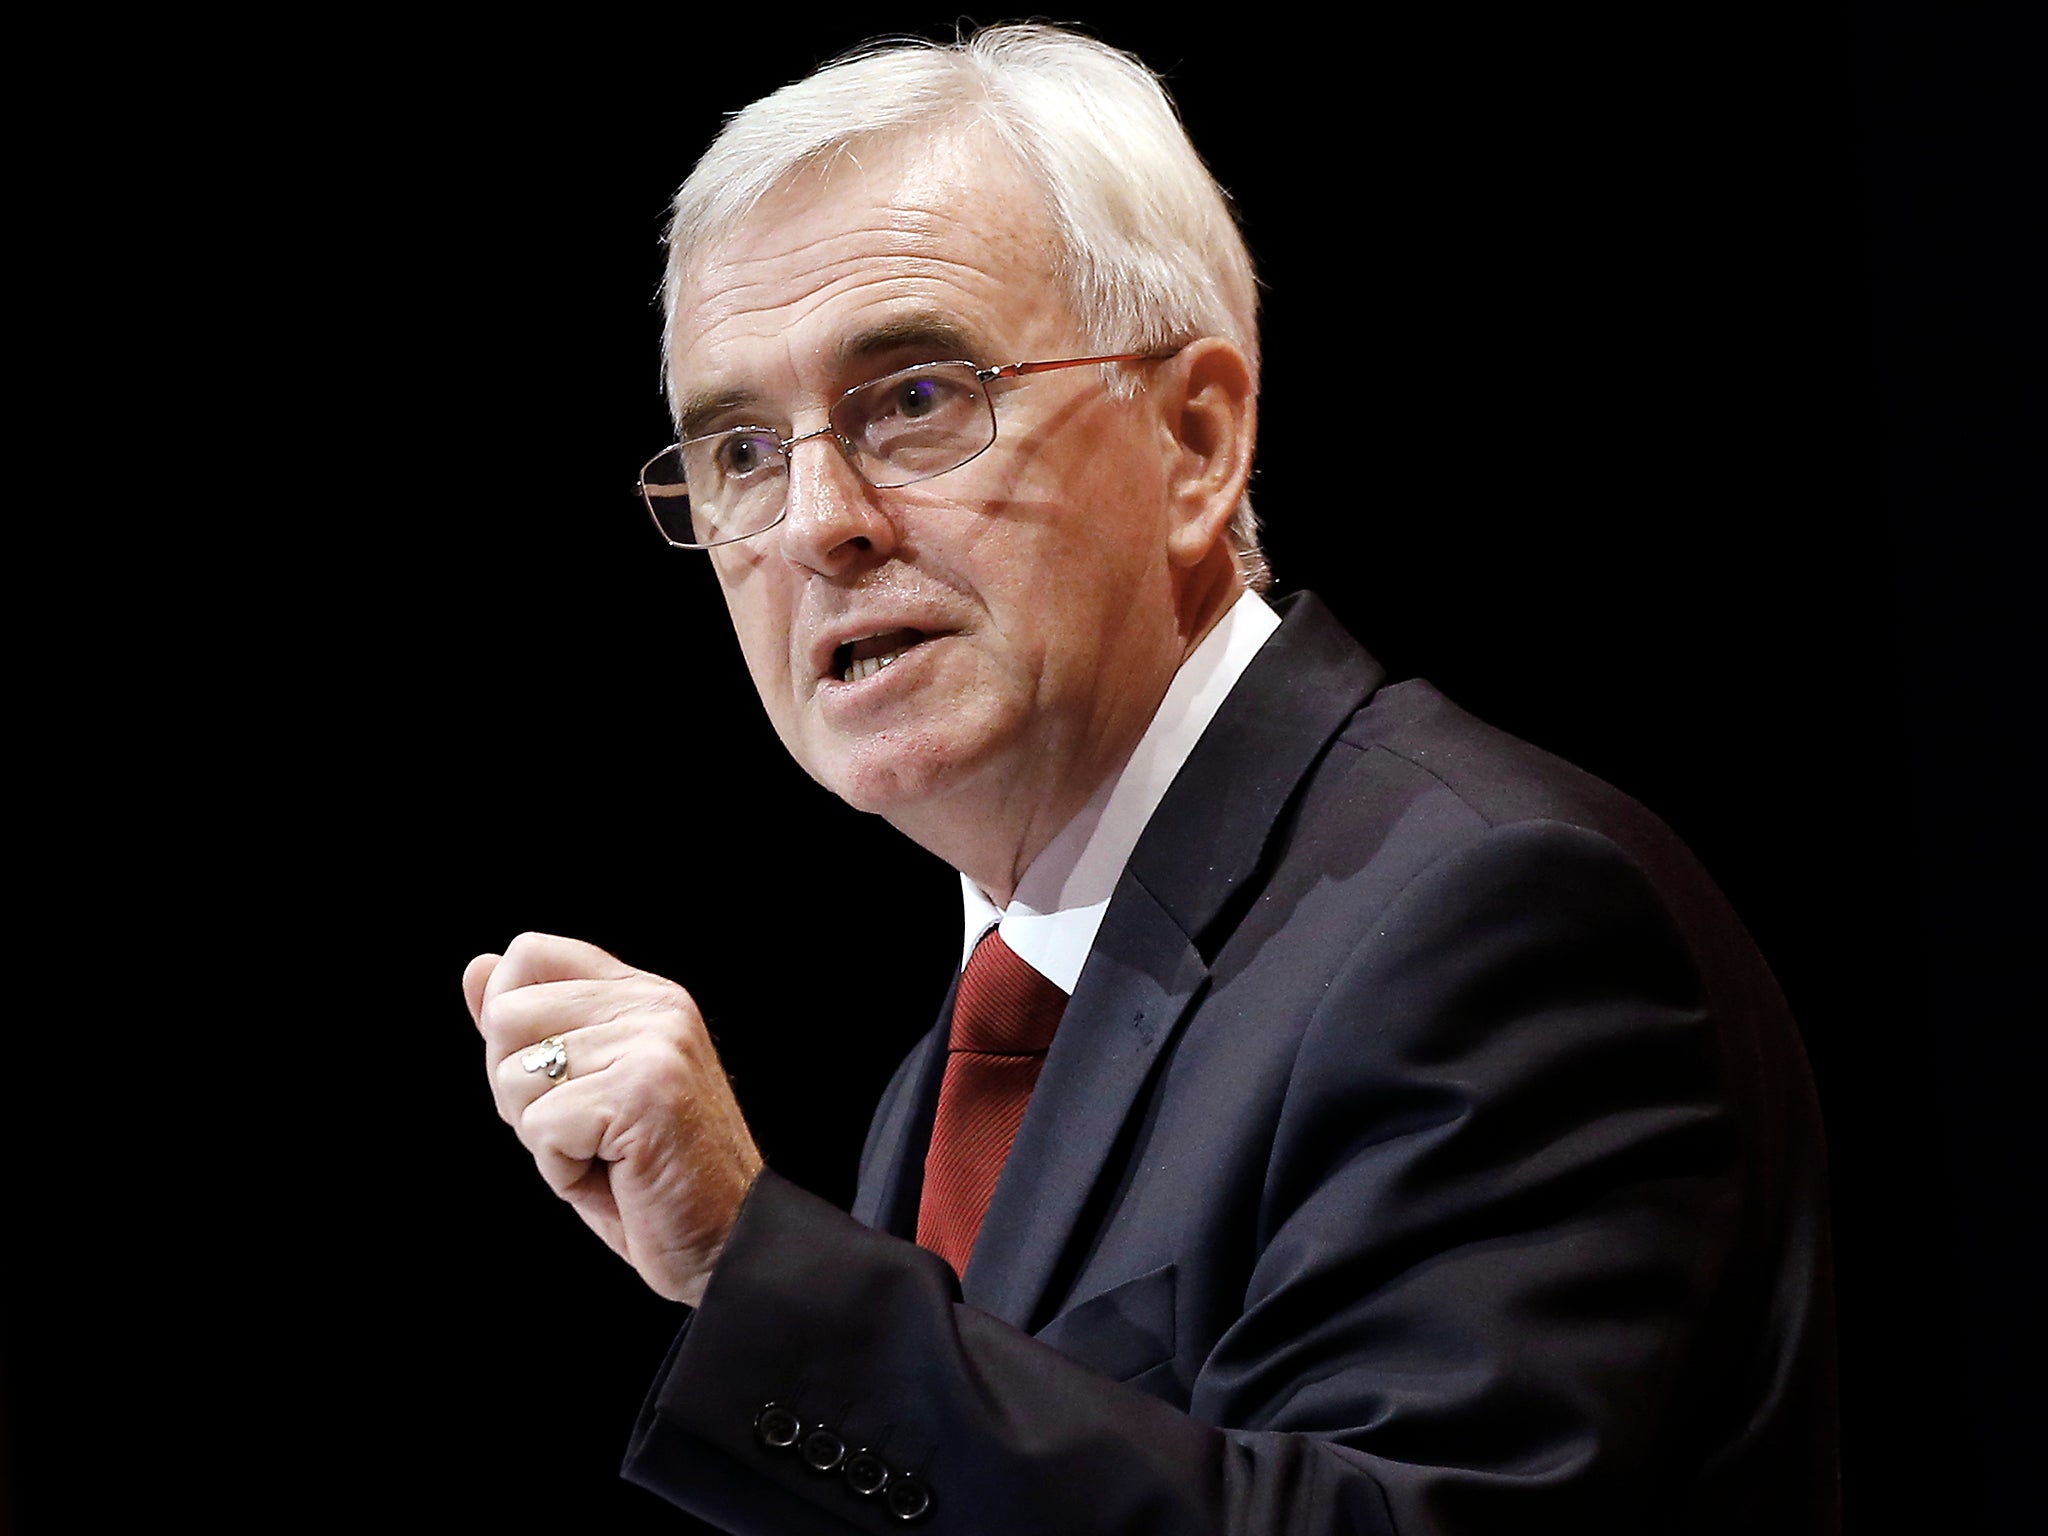 McDonnell will travel to Davos later this week